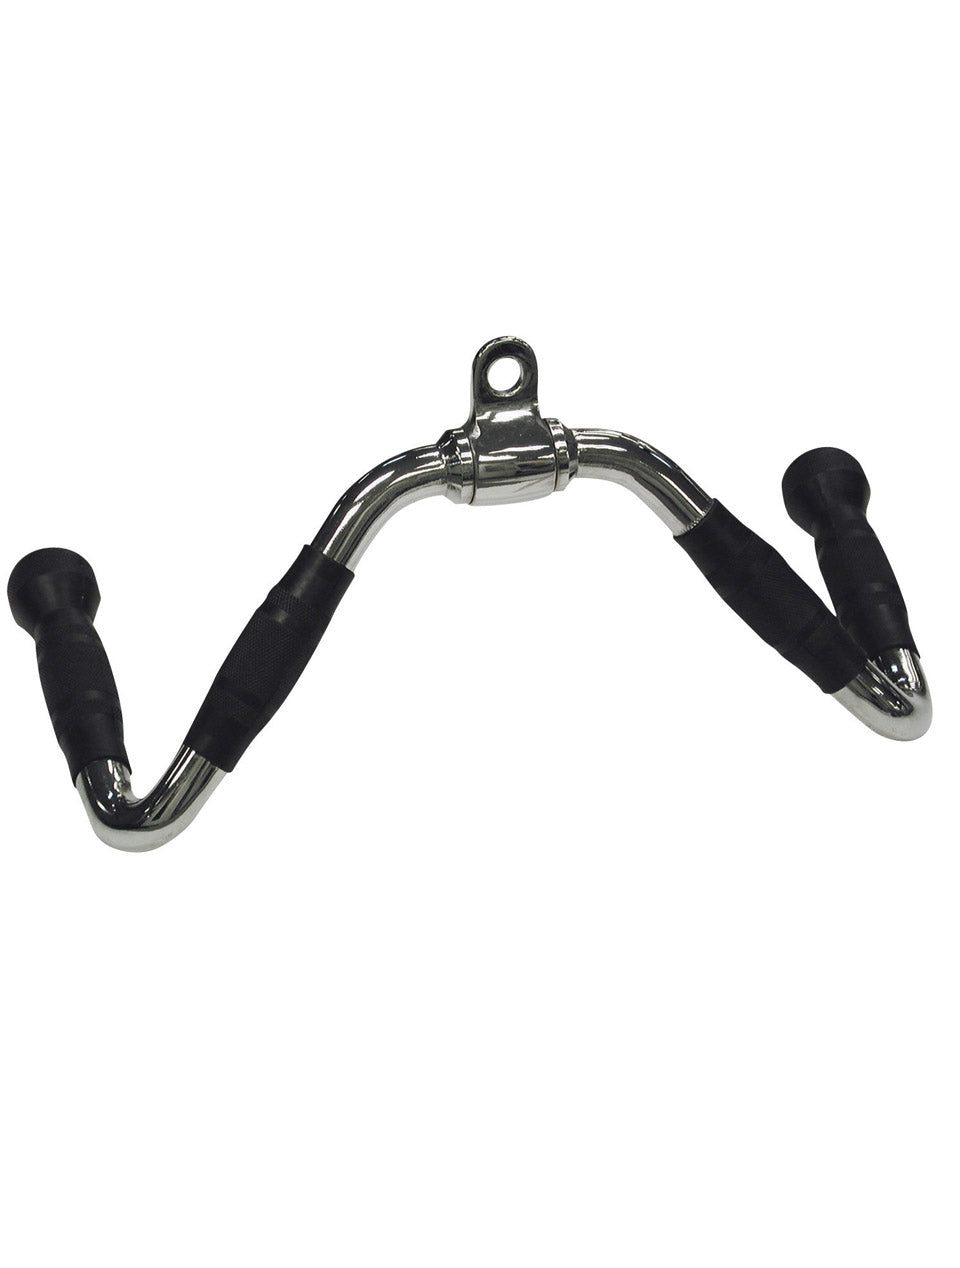 Revolving Lat Attachment Bar with Rubber Grips-1441 Fitness